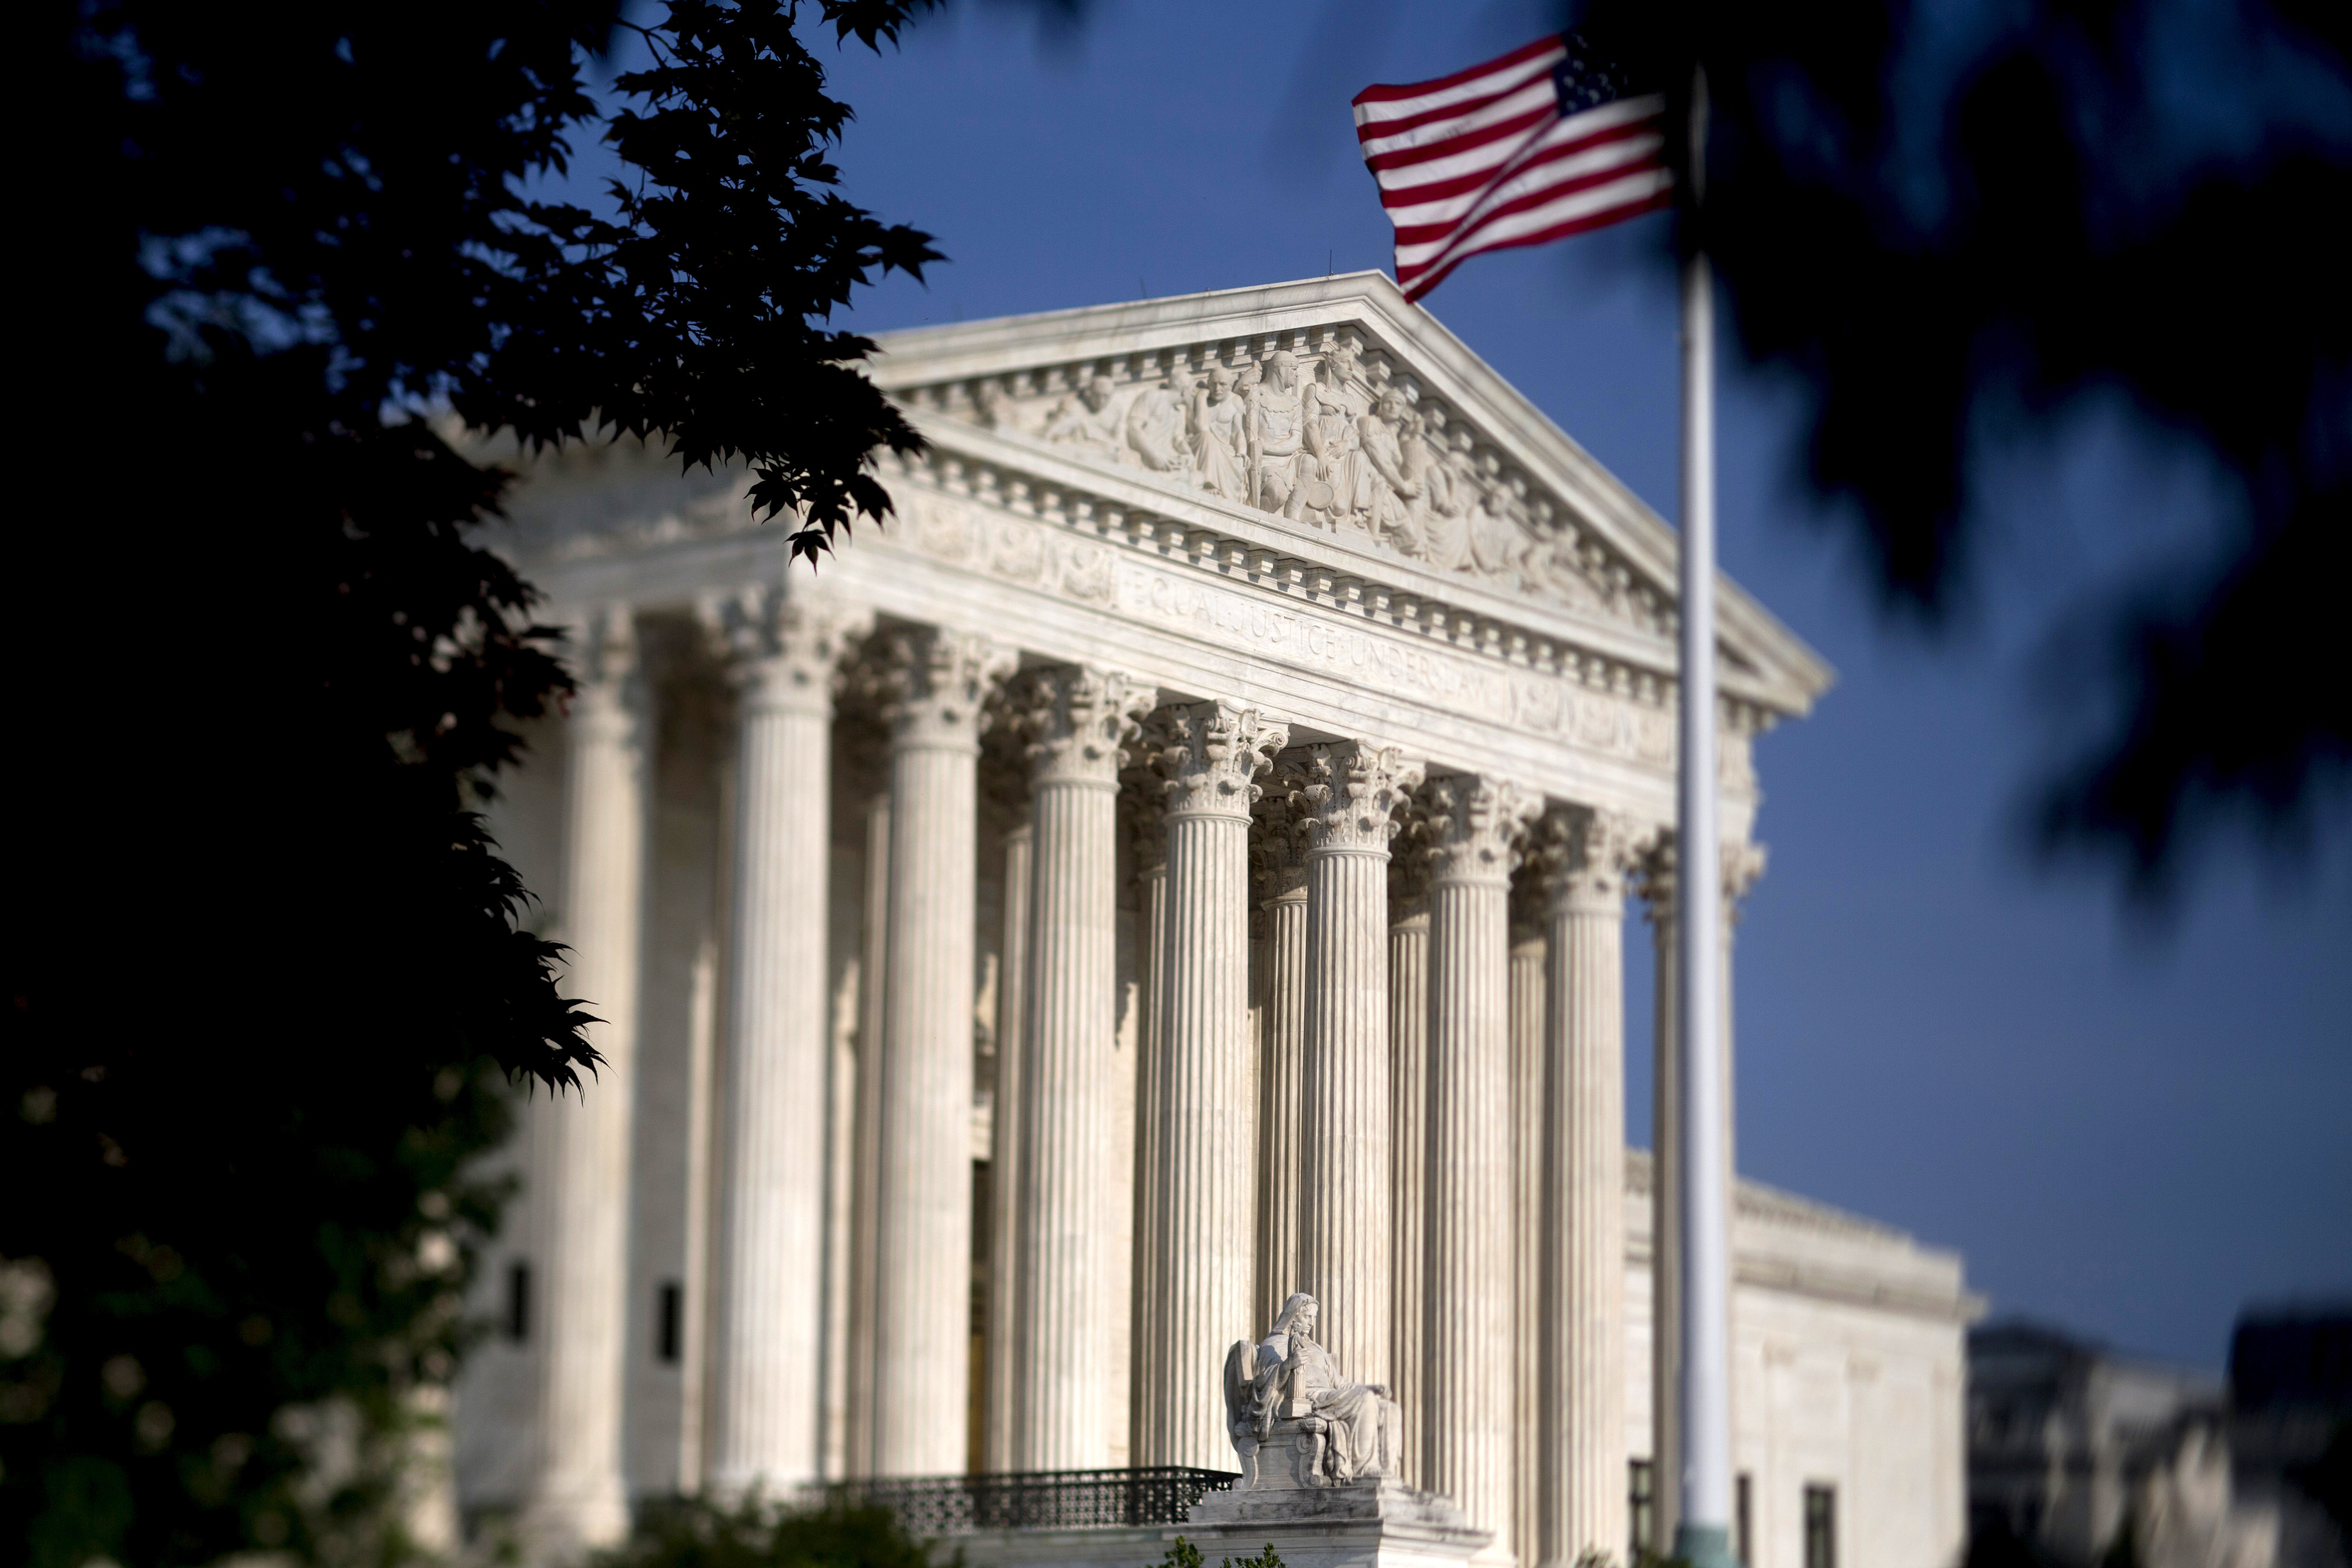 The American flag flies next to the U.S. Supreme Court. (Andrew Harrer—Bloomberg/Getty Images)